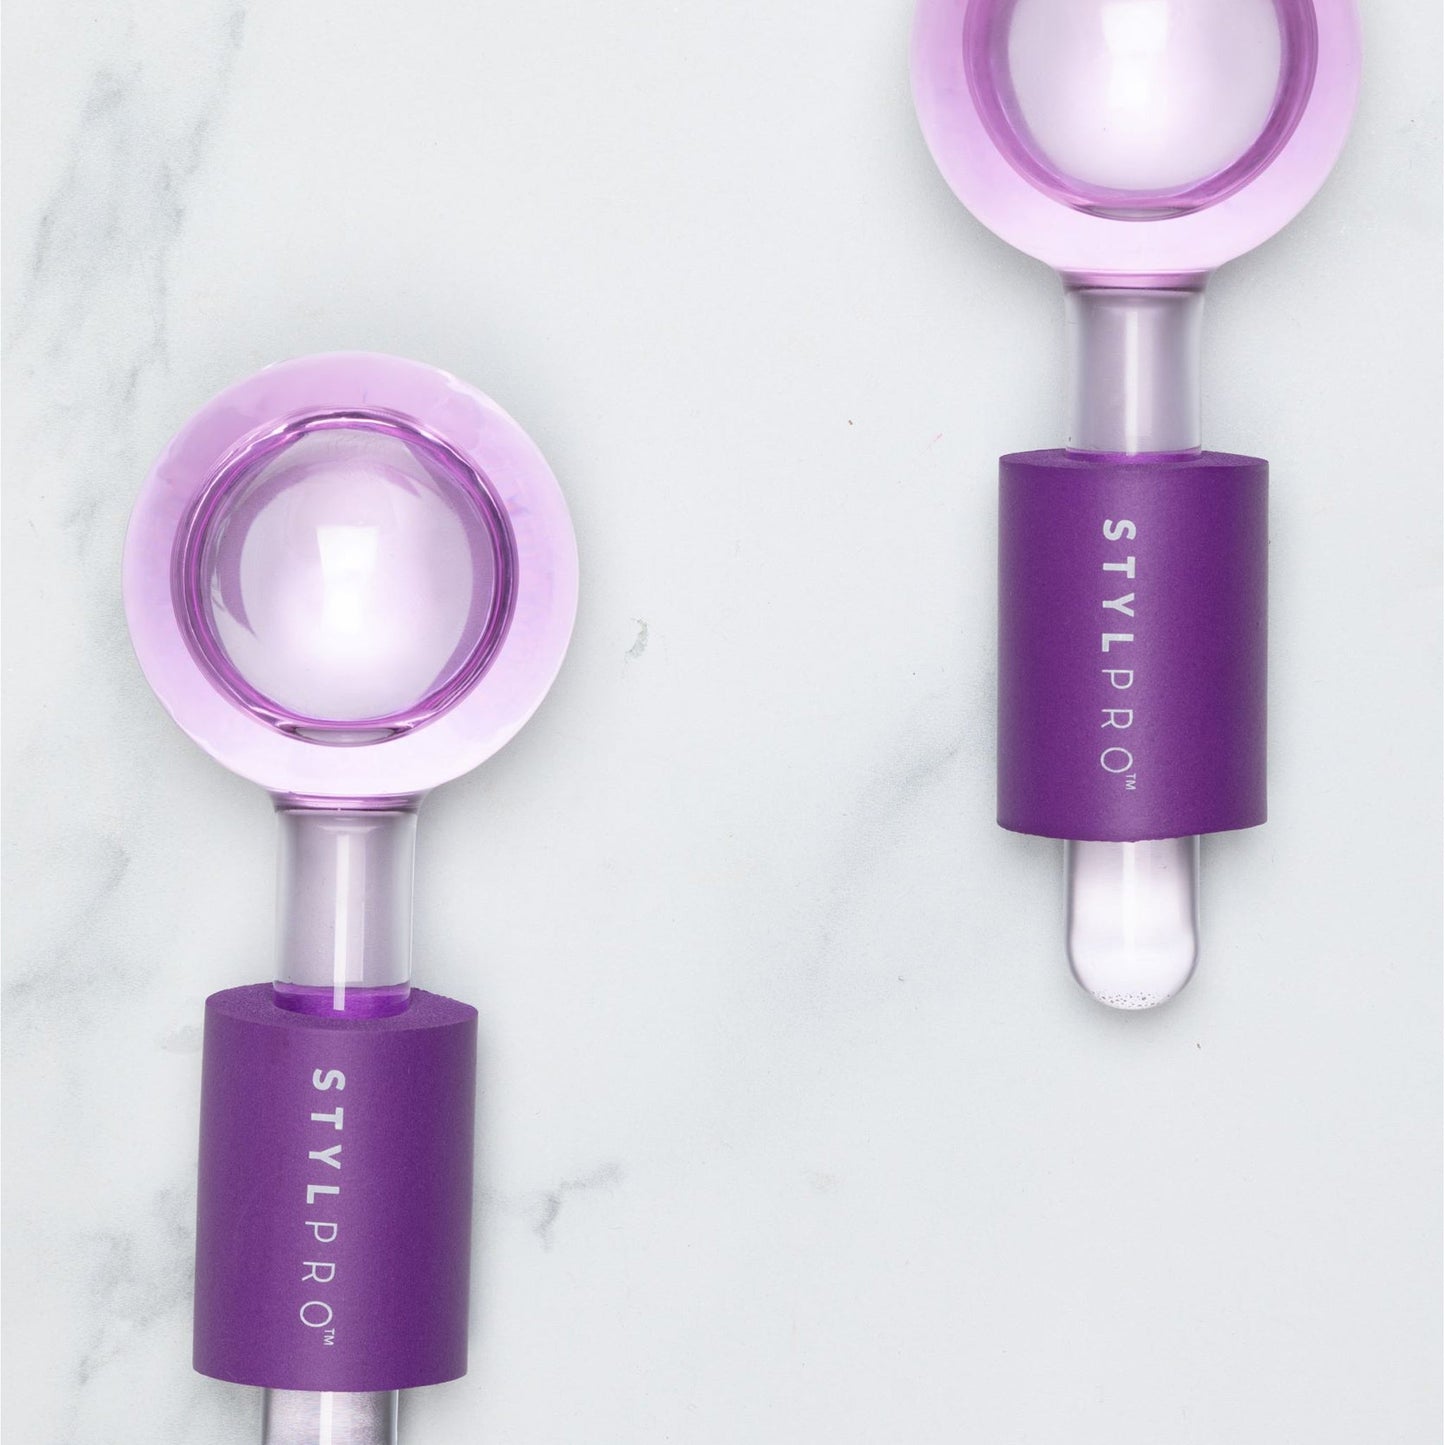 STYLPRO Facial Ice Globes